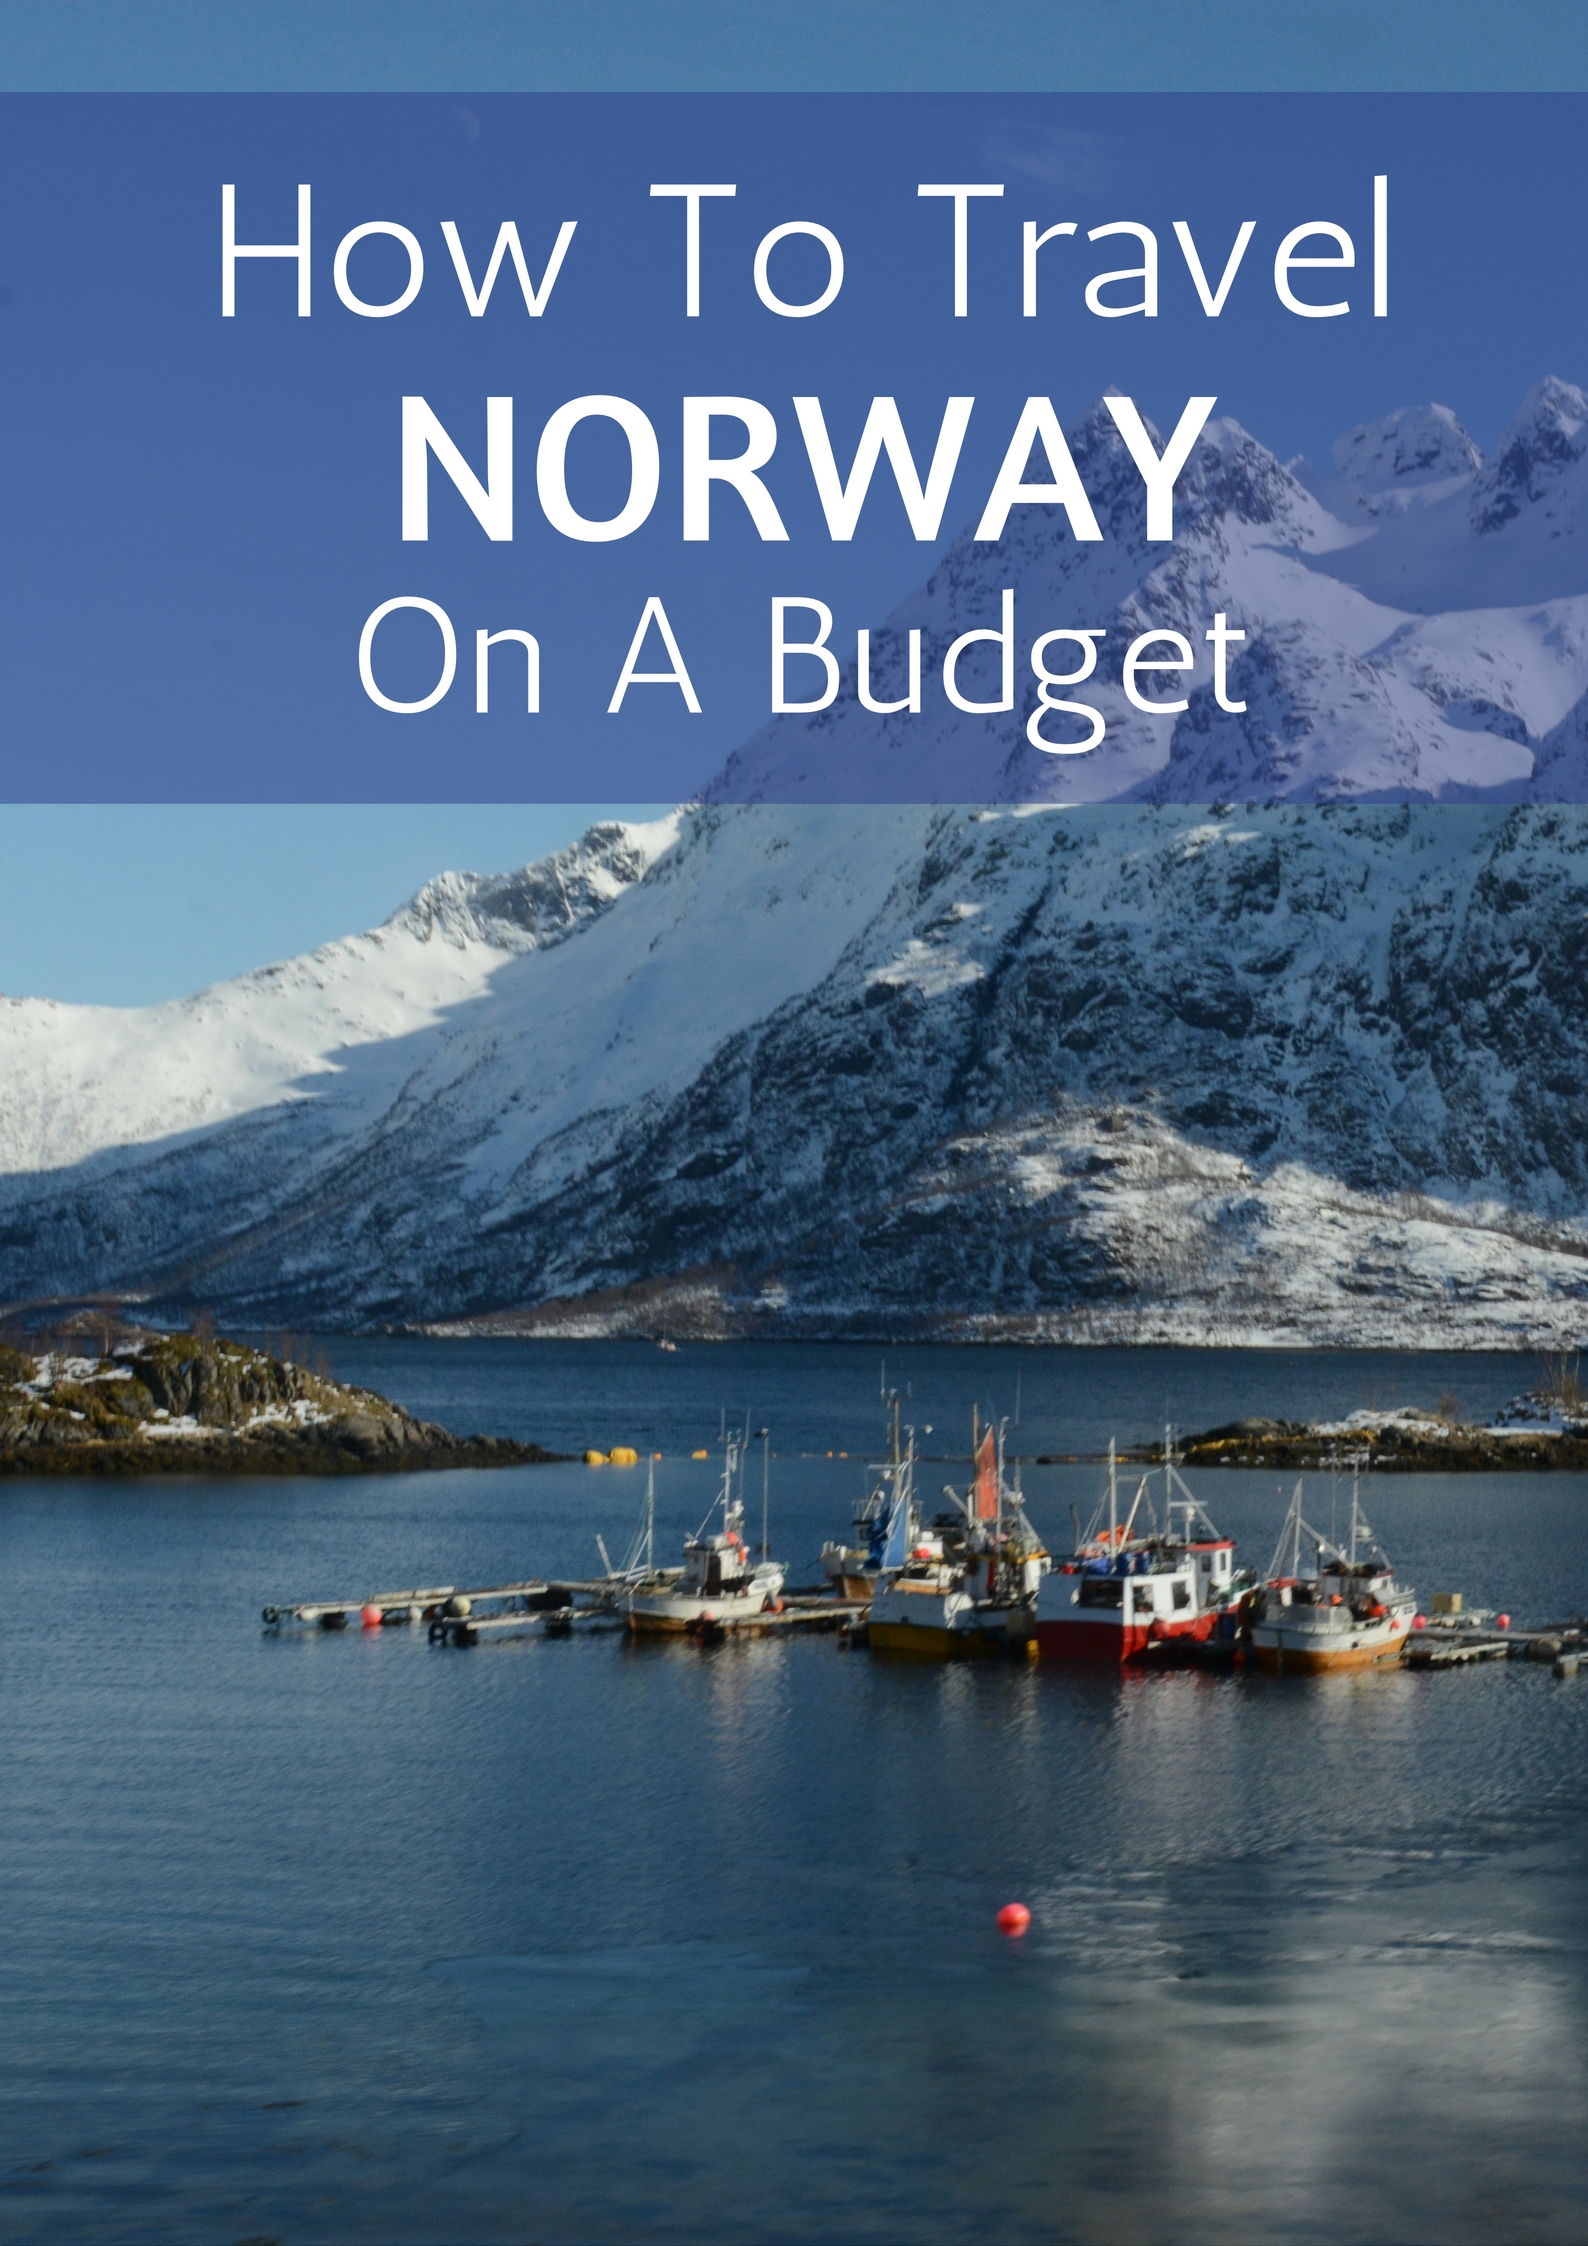 How To Travel Norway On A Budget